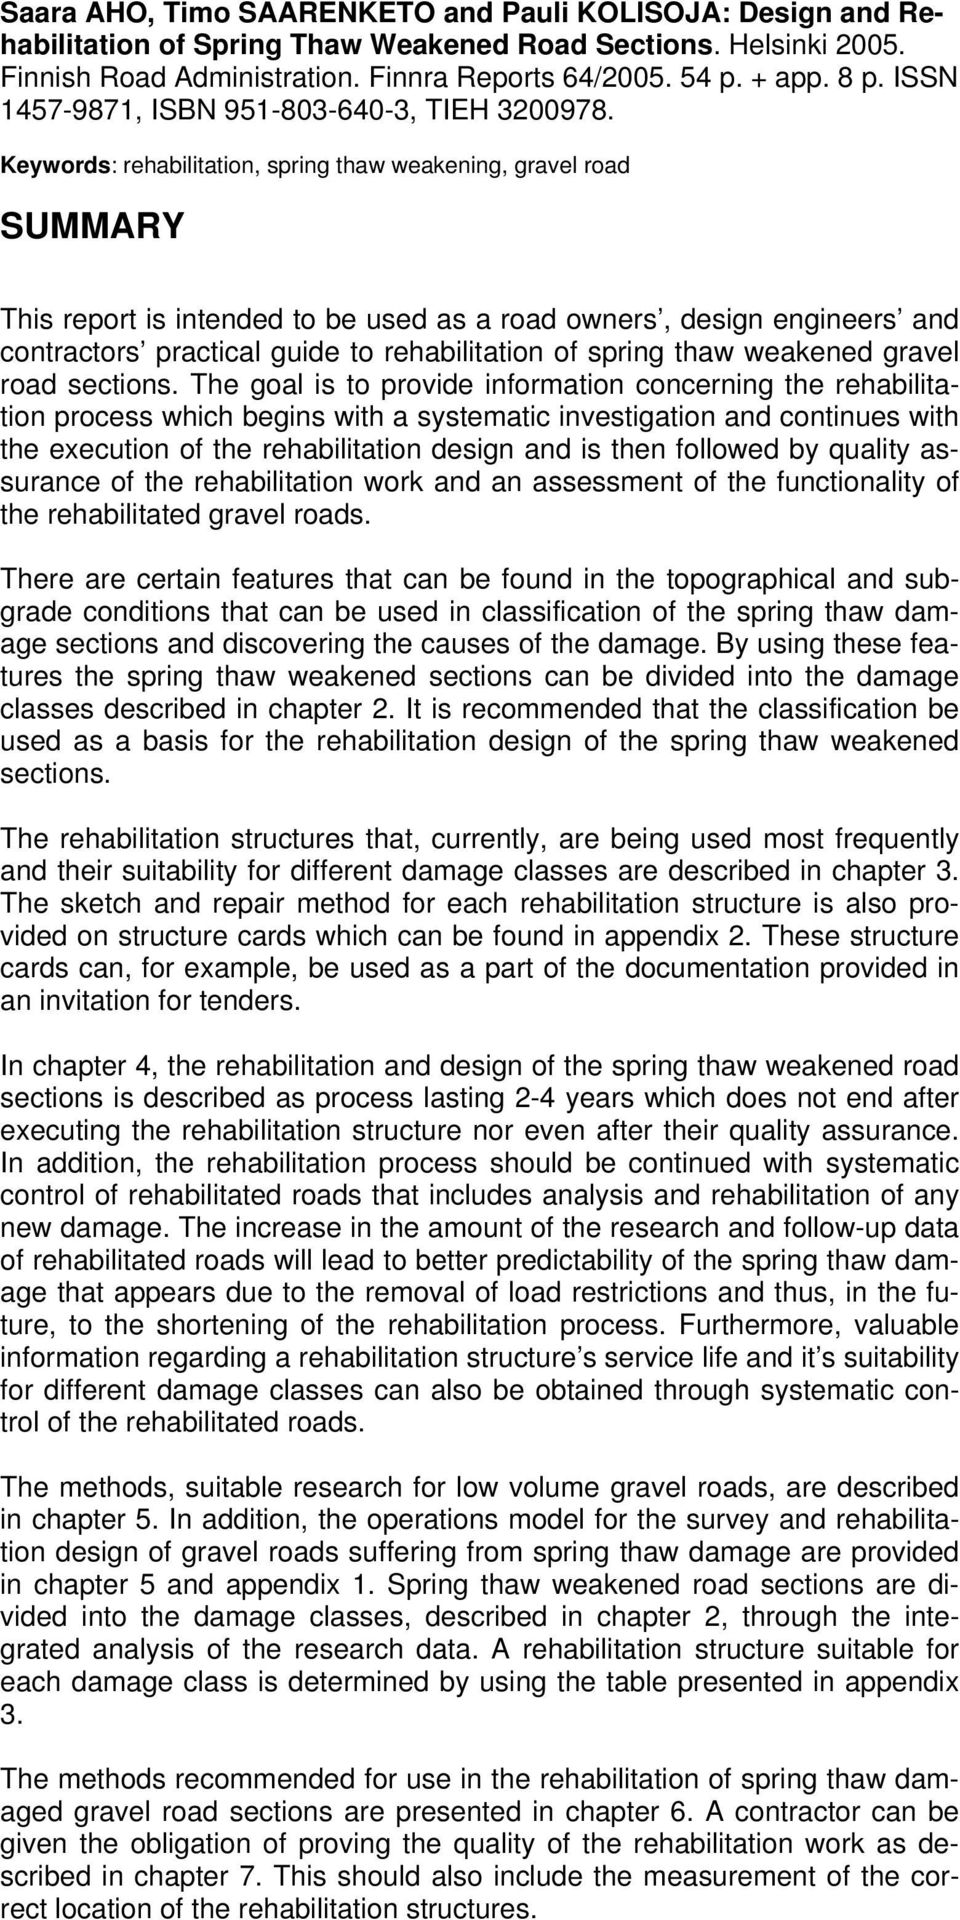 Keywords: rehabilitation, spring thaw weakening, gravel road SUMMARY This report is intended to be used as a road owners, design engineers and contractors practical guide to rehabilitation of spring